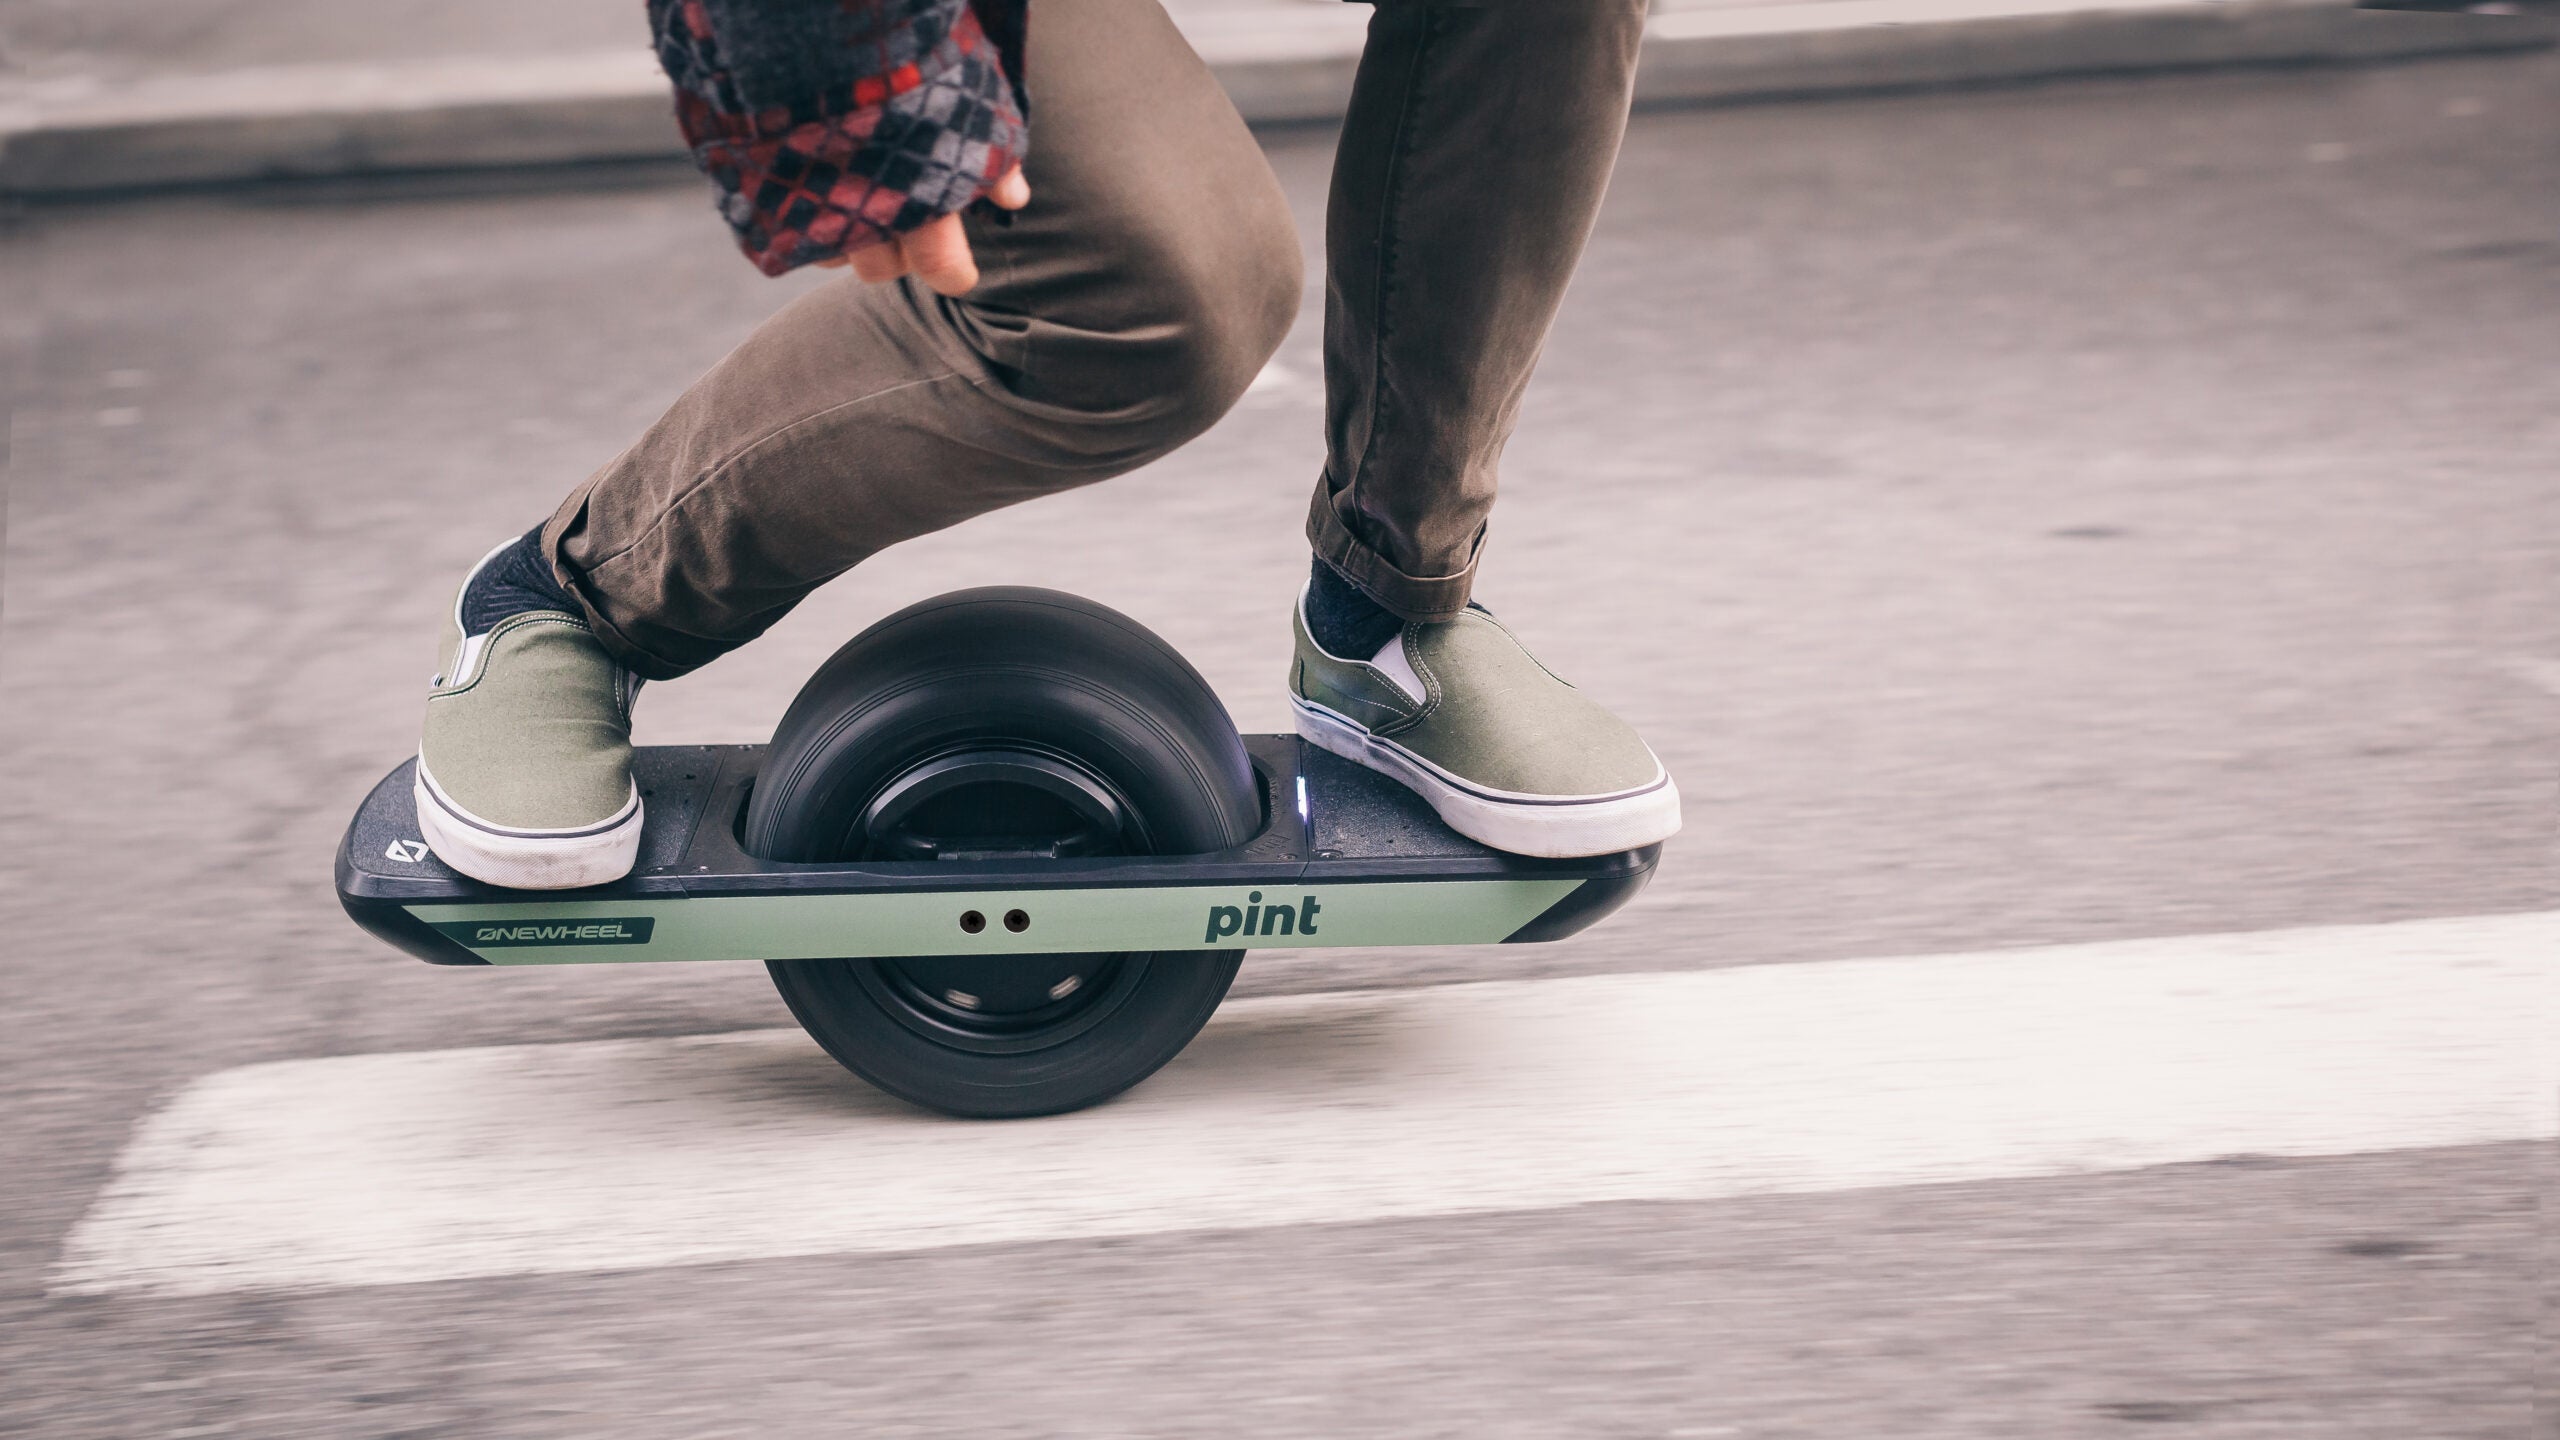 How This One Wheeled Skateboard Lets Riders Cruise Without Crashing